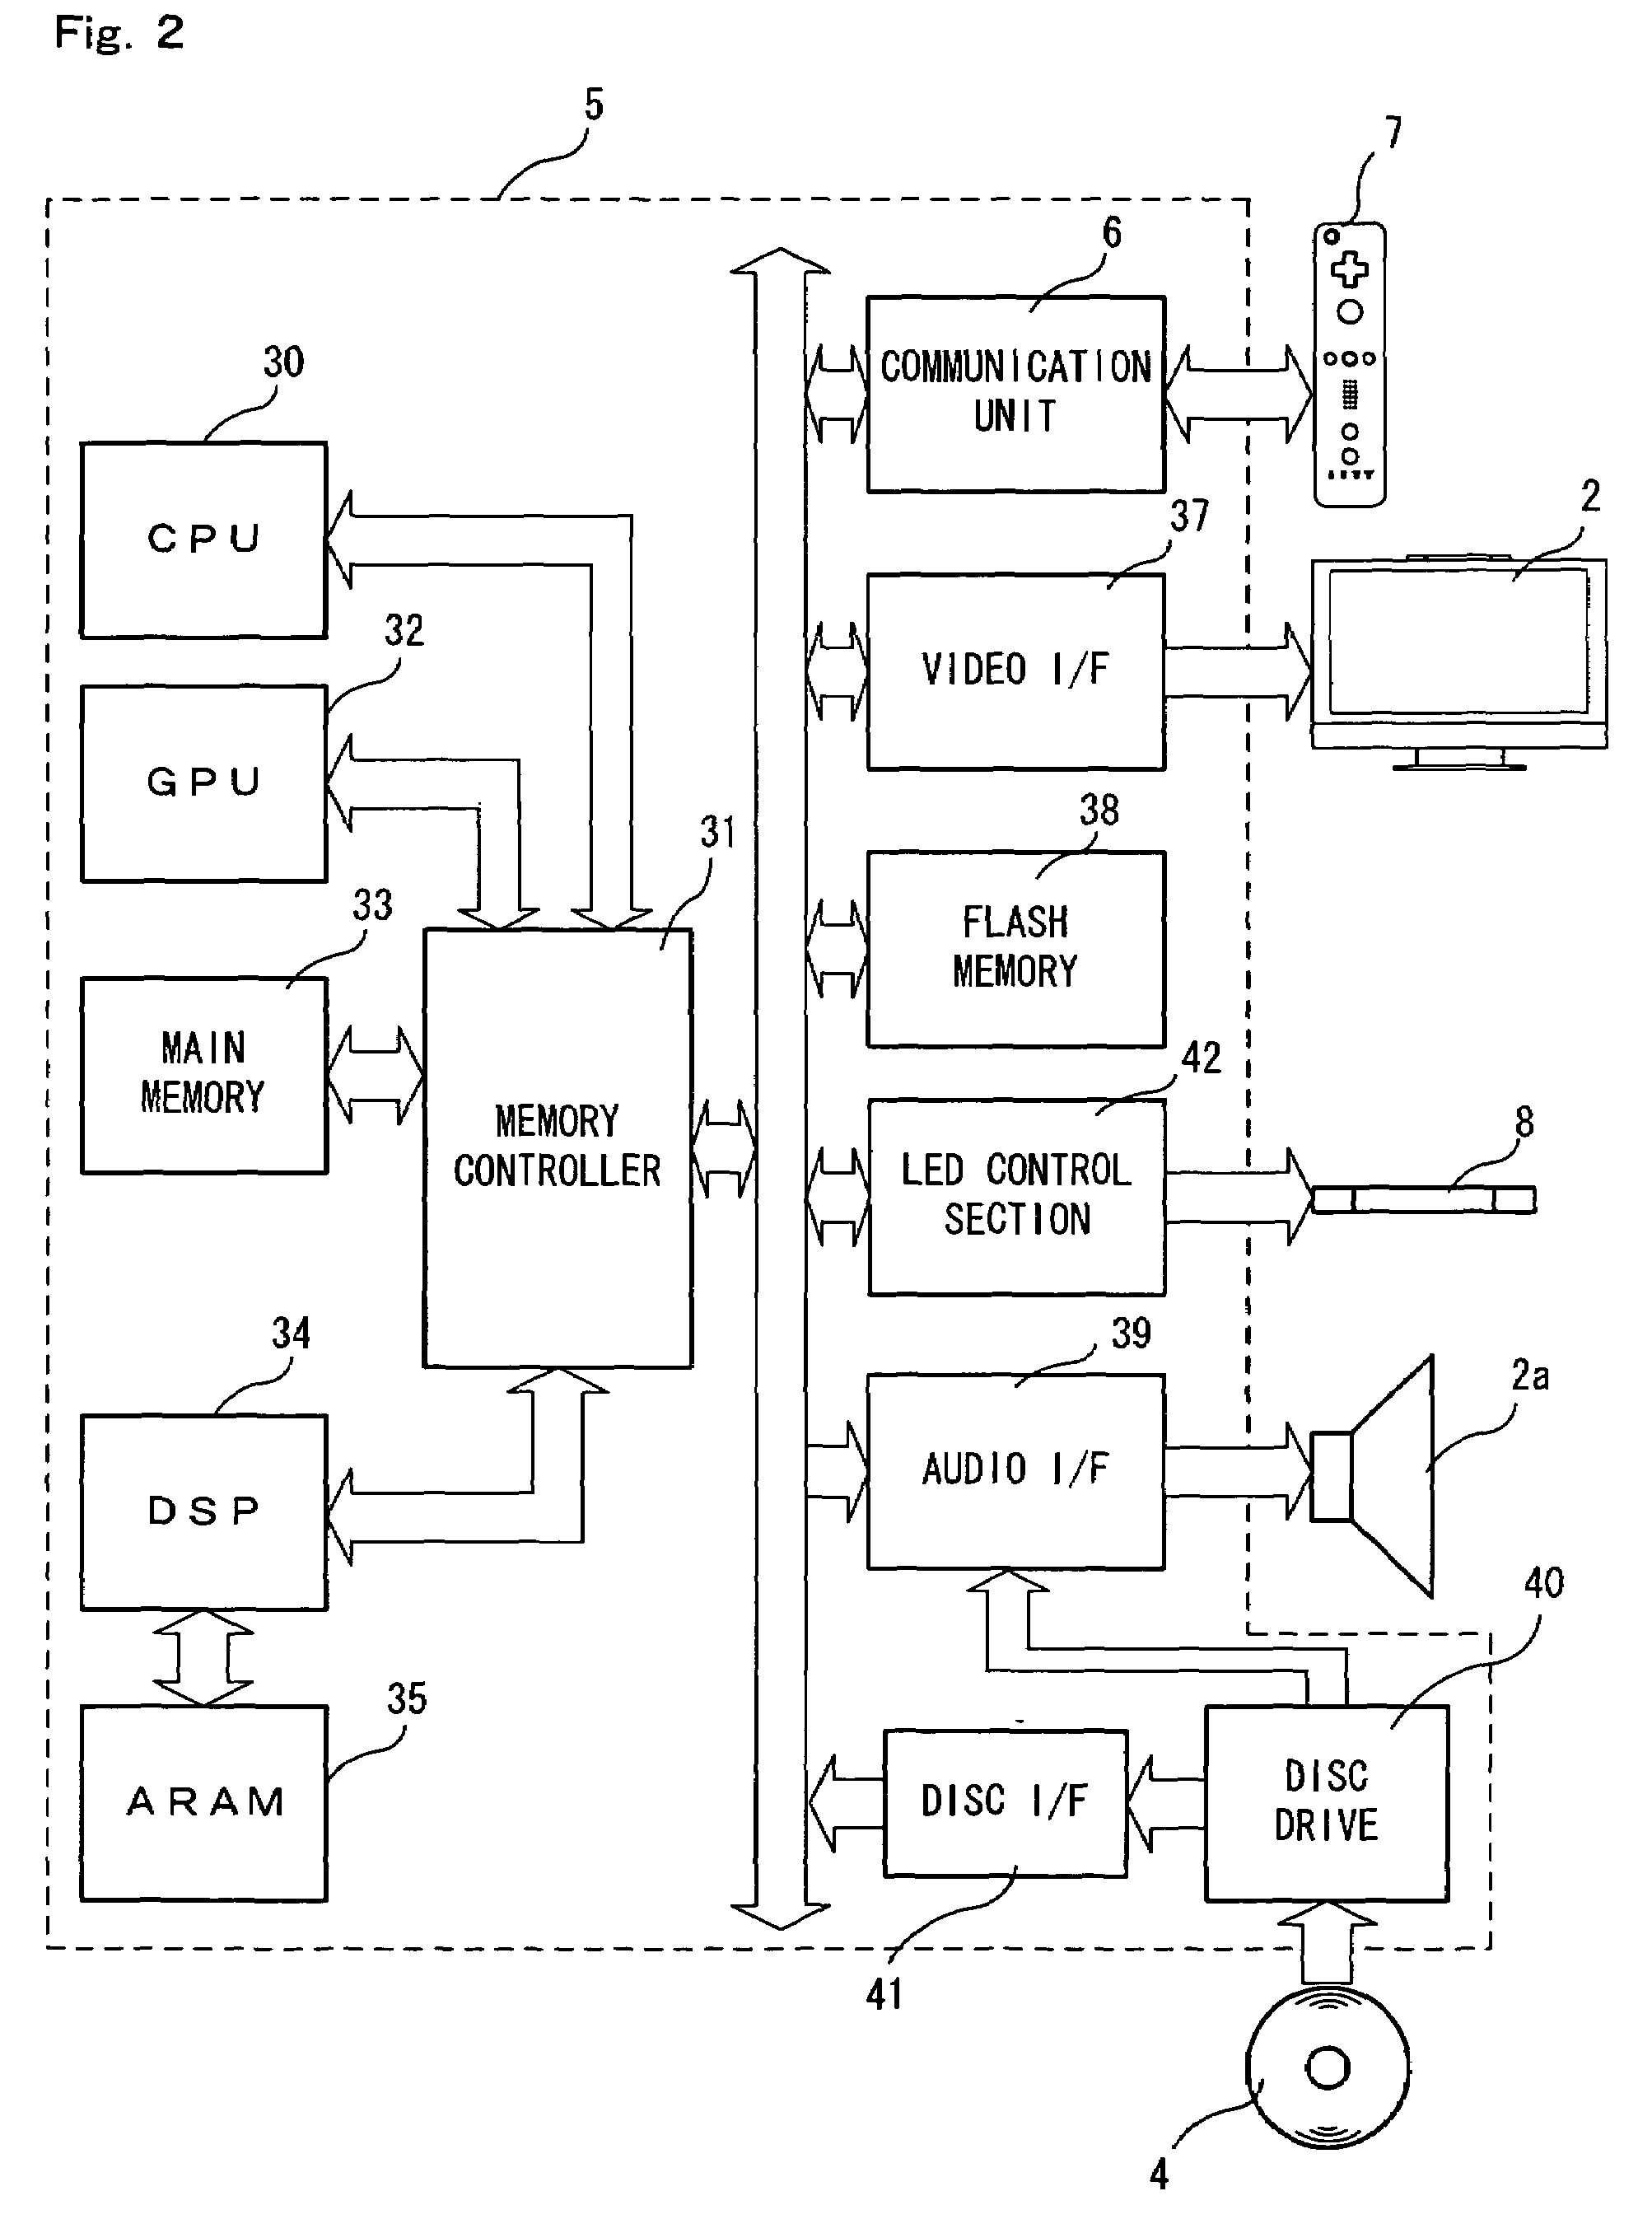 Computer-readable storage medium having game program stored thereon and game apparatus